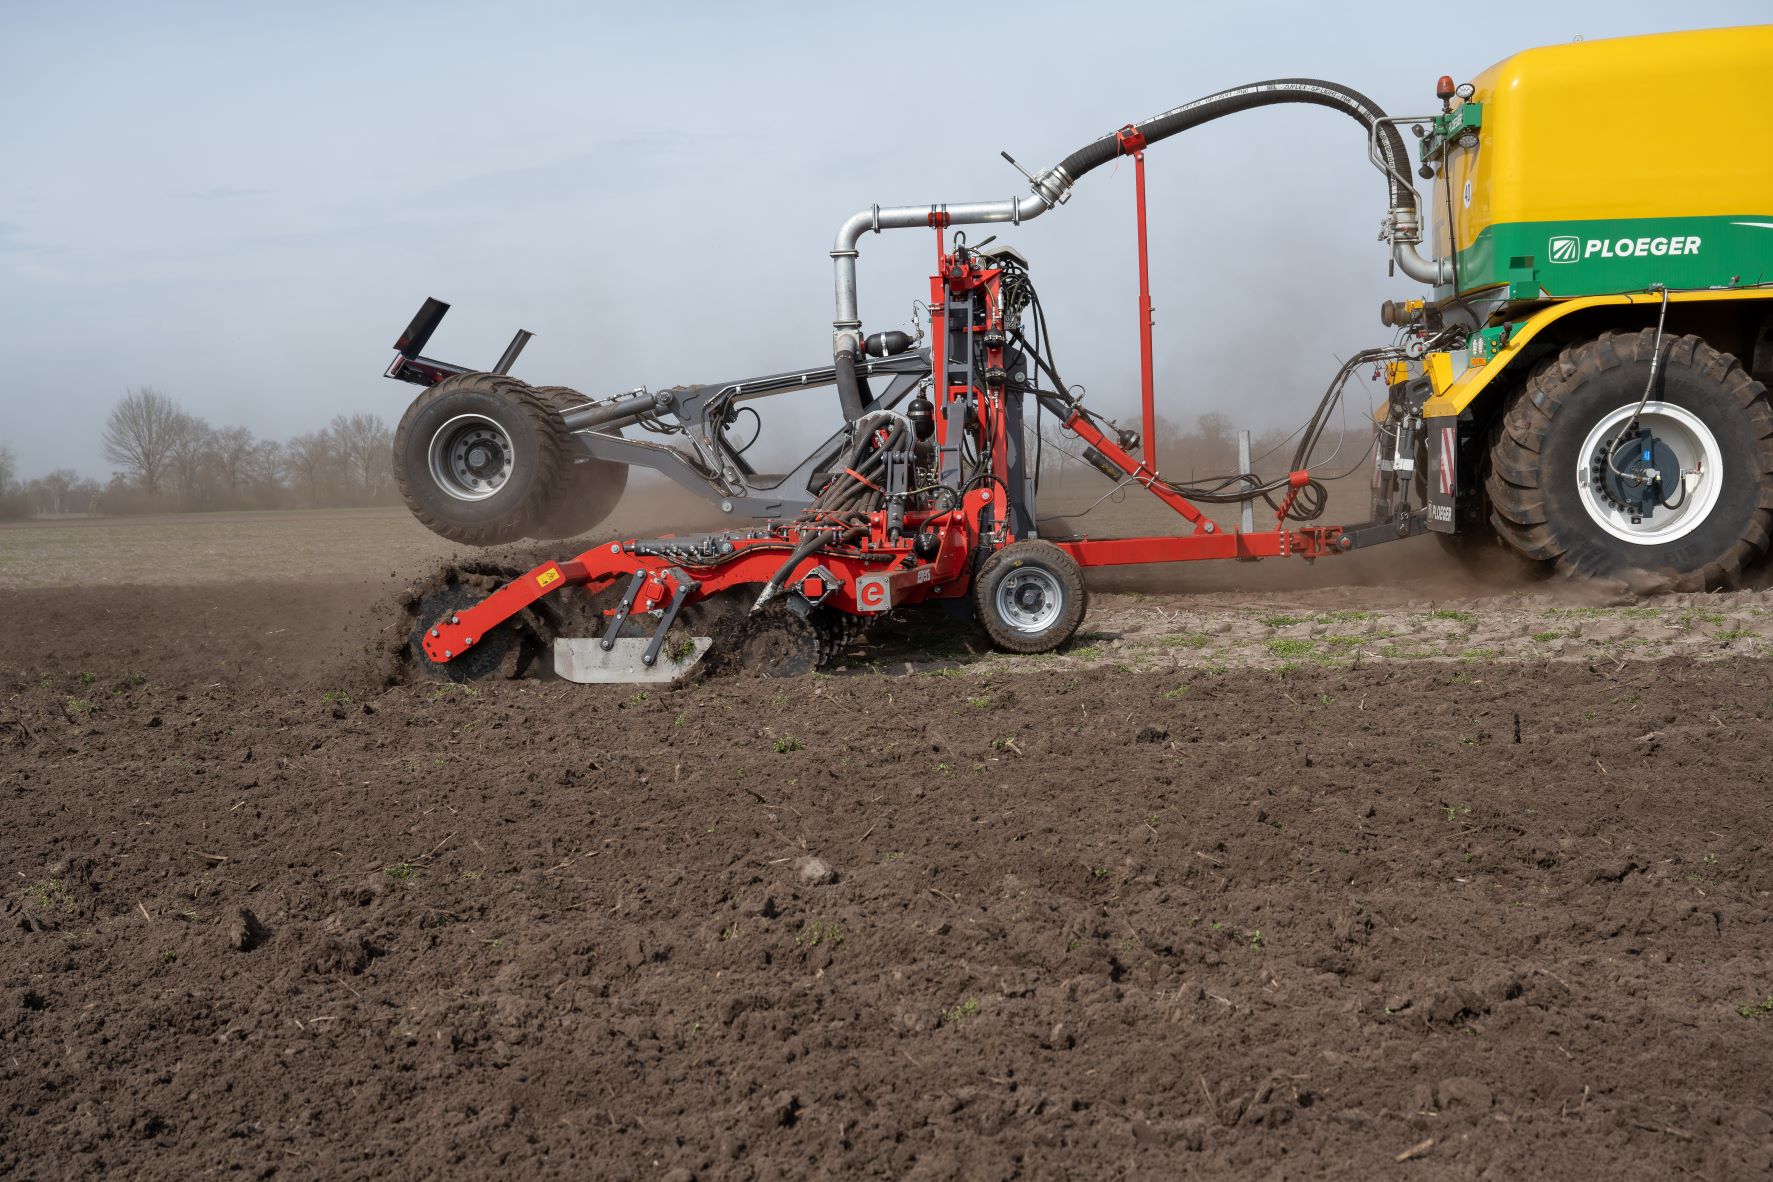 Evers slurry disc harrow, Type Toric XL 1200 - slurry incorporation across a large working width 